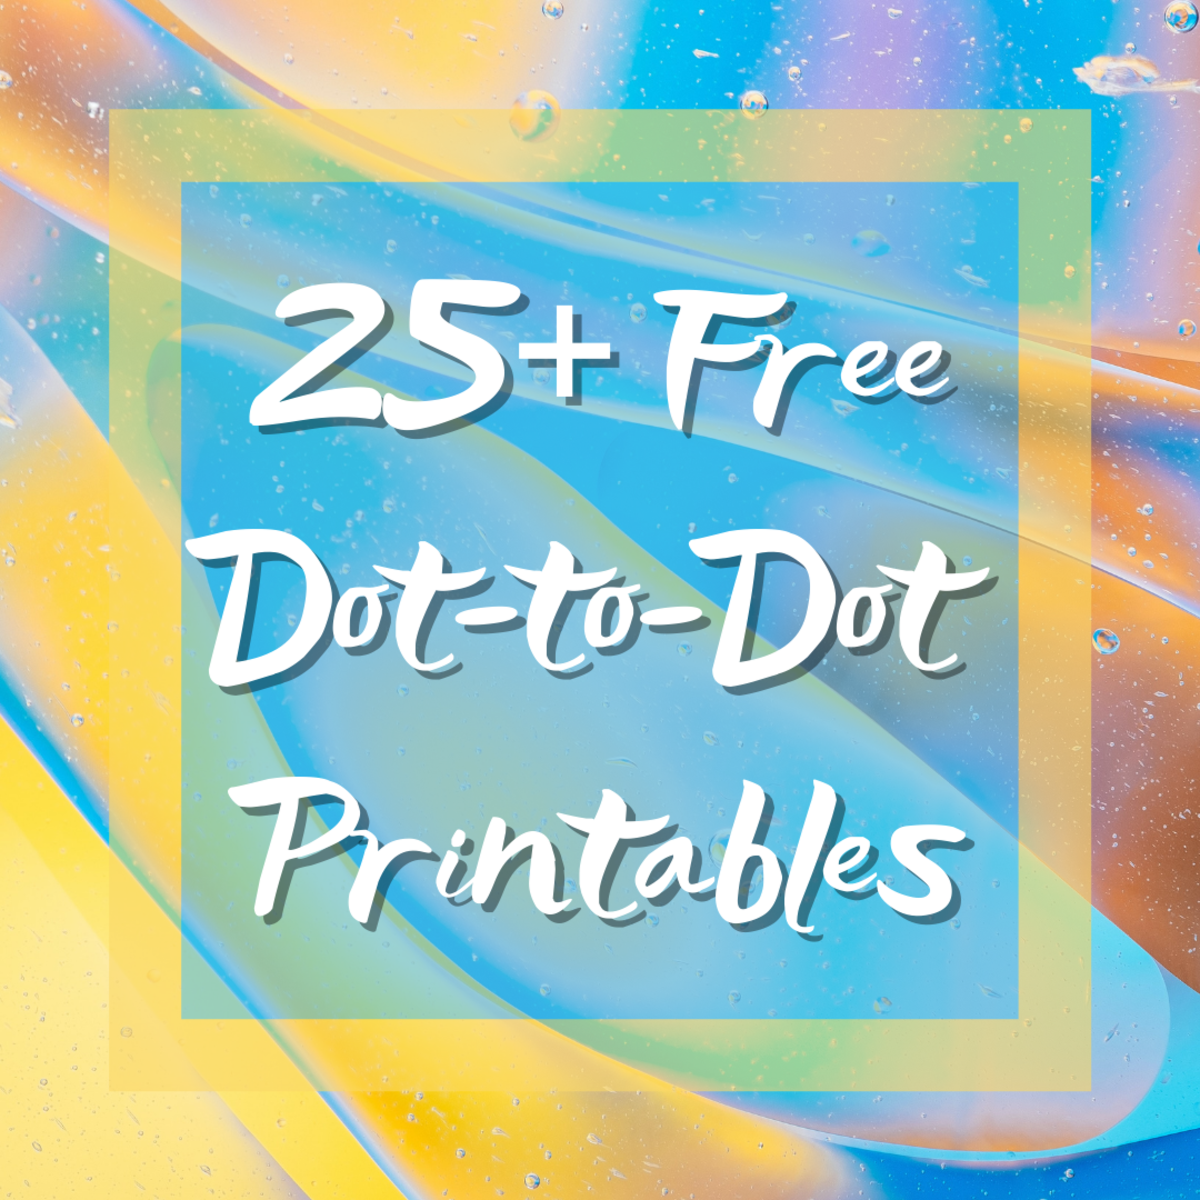 25+ Free Dot-to-Dot Printables (From Very Easy to Extreme)